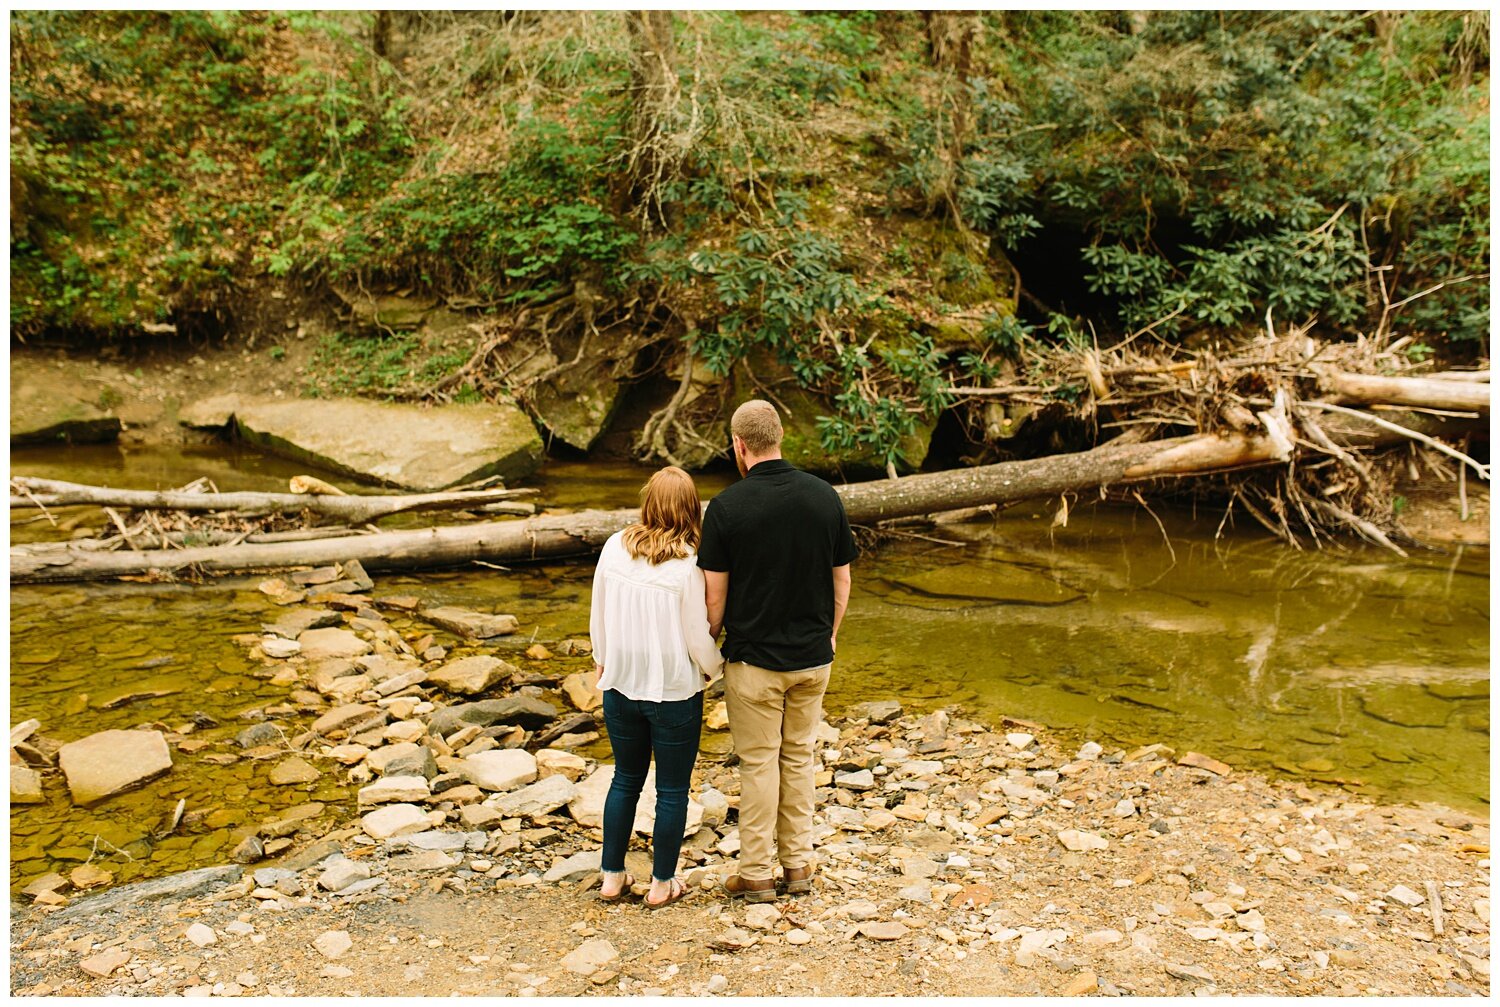 Kendra_Farris_Photography_Red_River_Gorge_Engagement_Photos-35.jpg